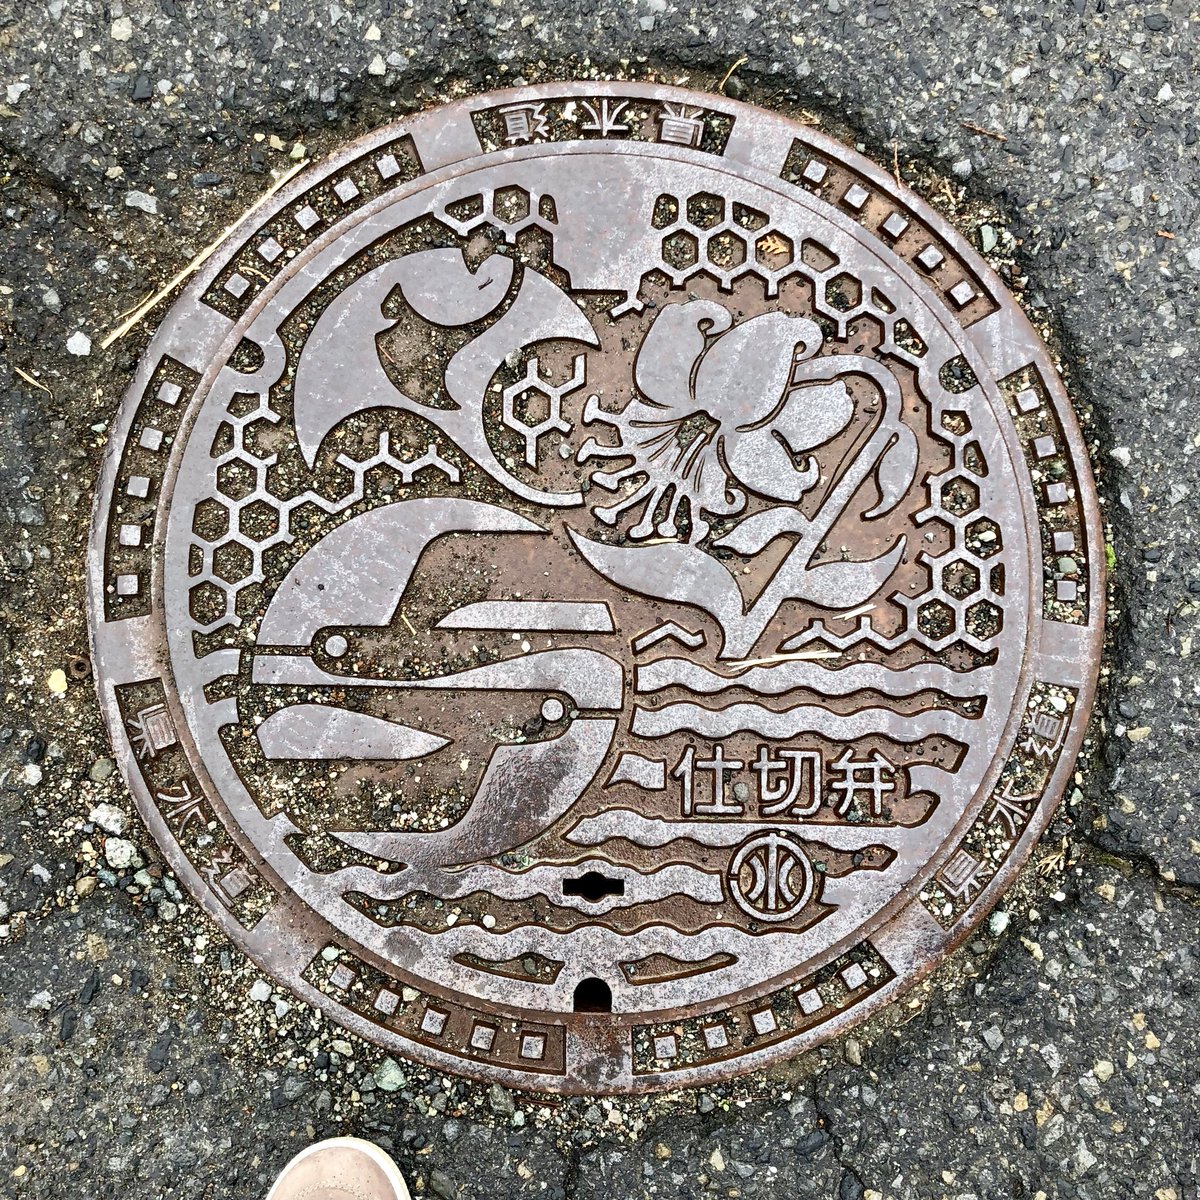 A manhole cover from Hakone